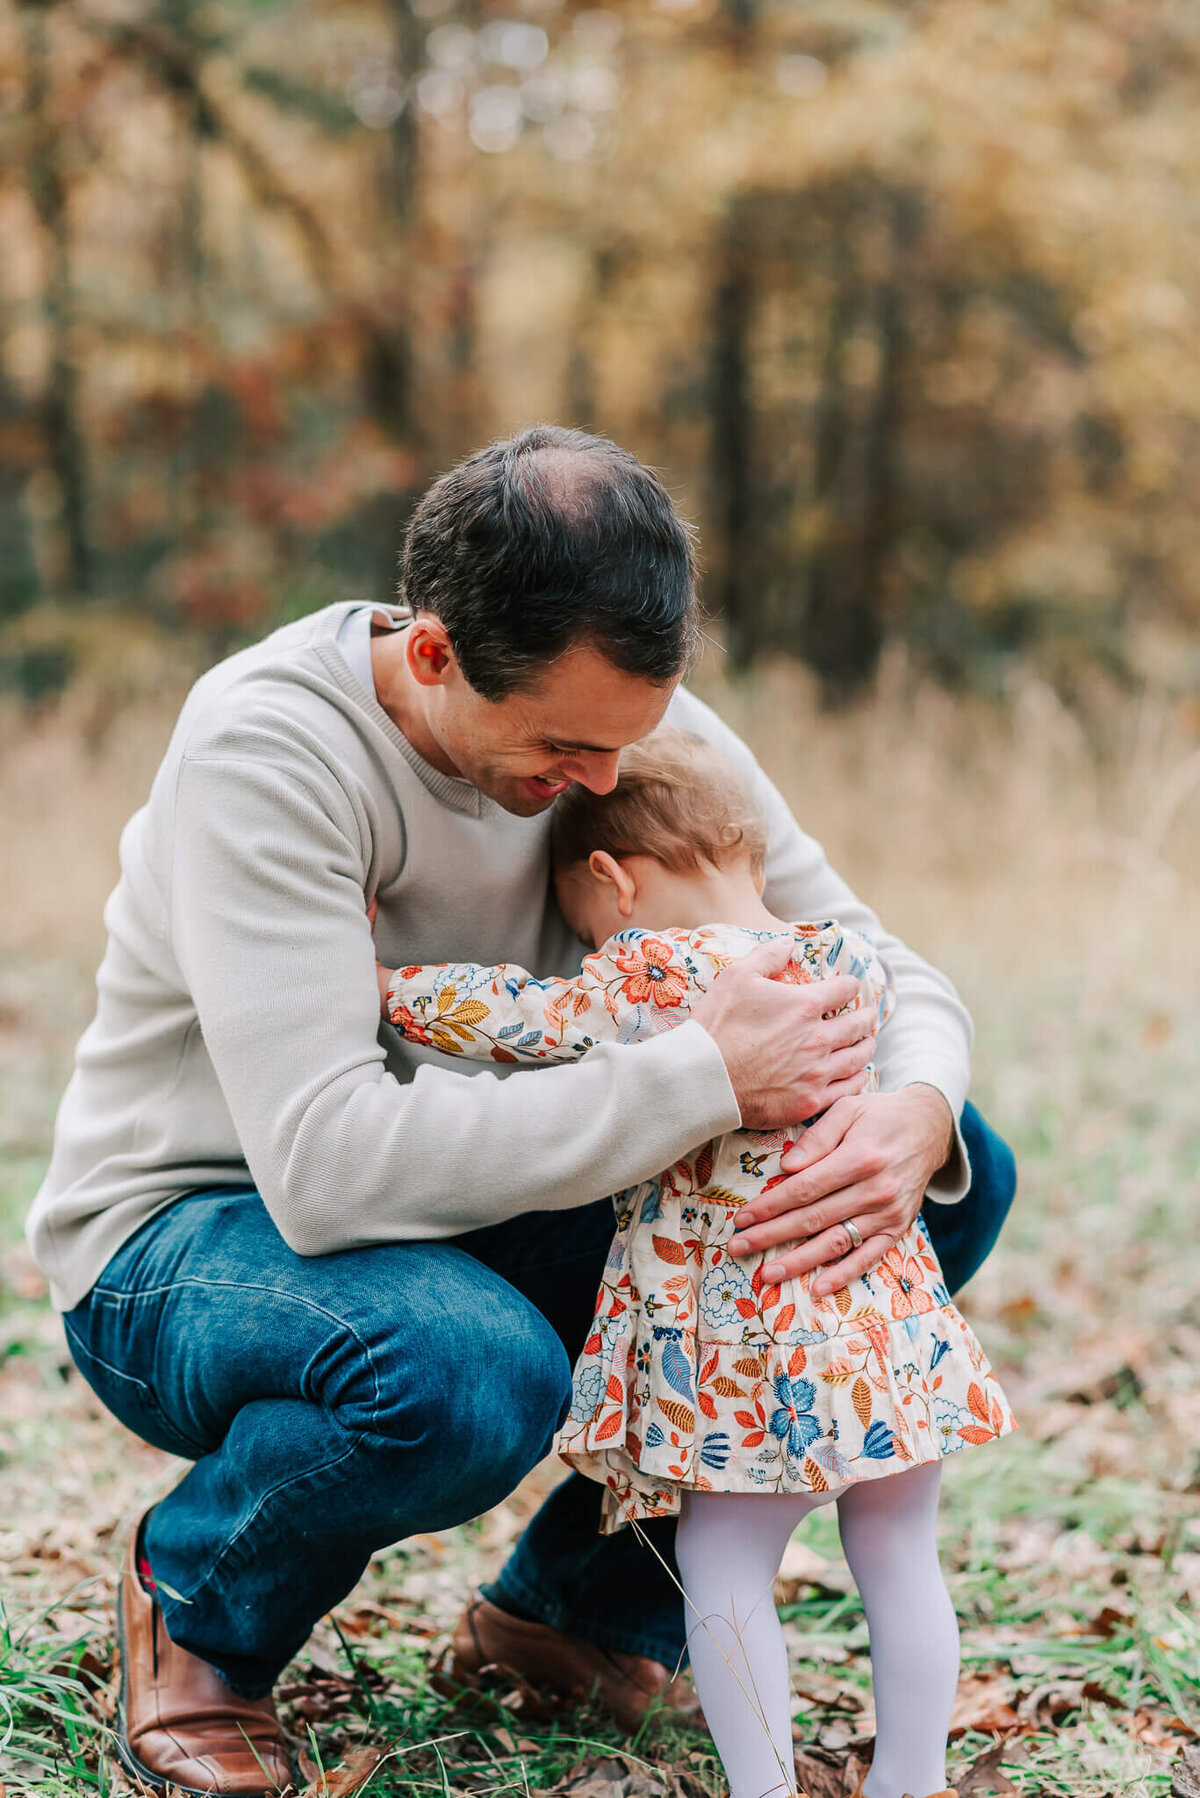 A papa getting a hug from his little daughter, taken by Denise Van a Northern Virginia family photographer